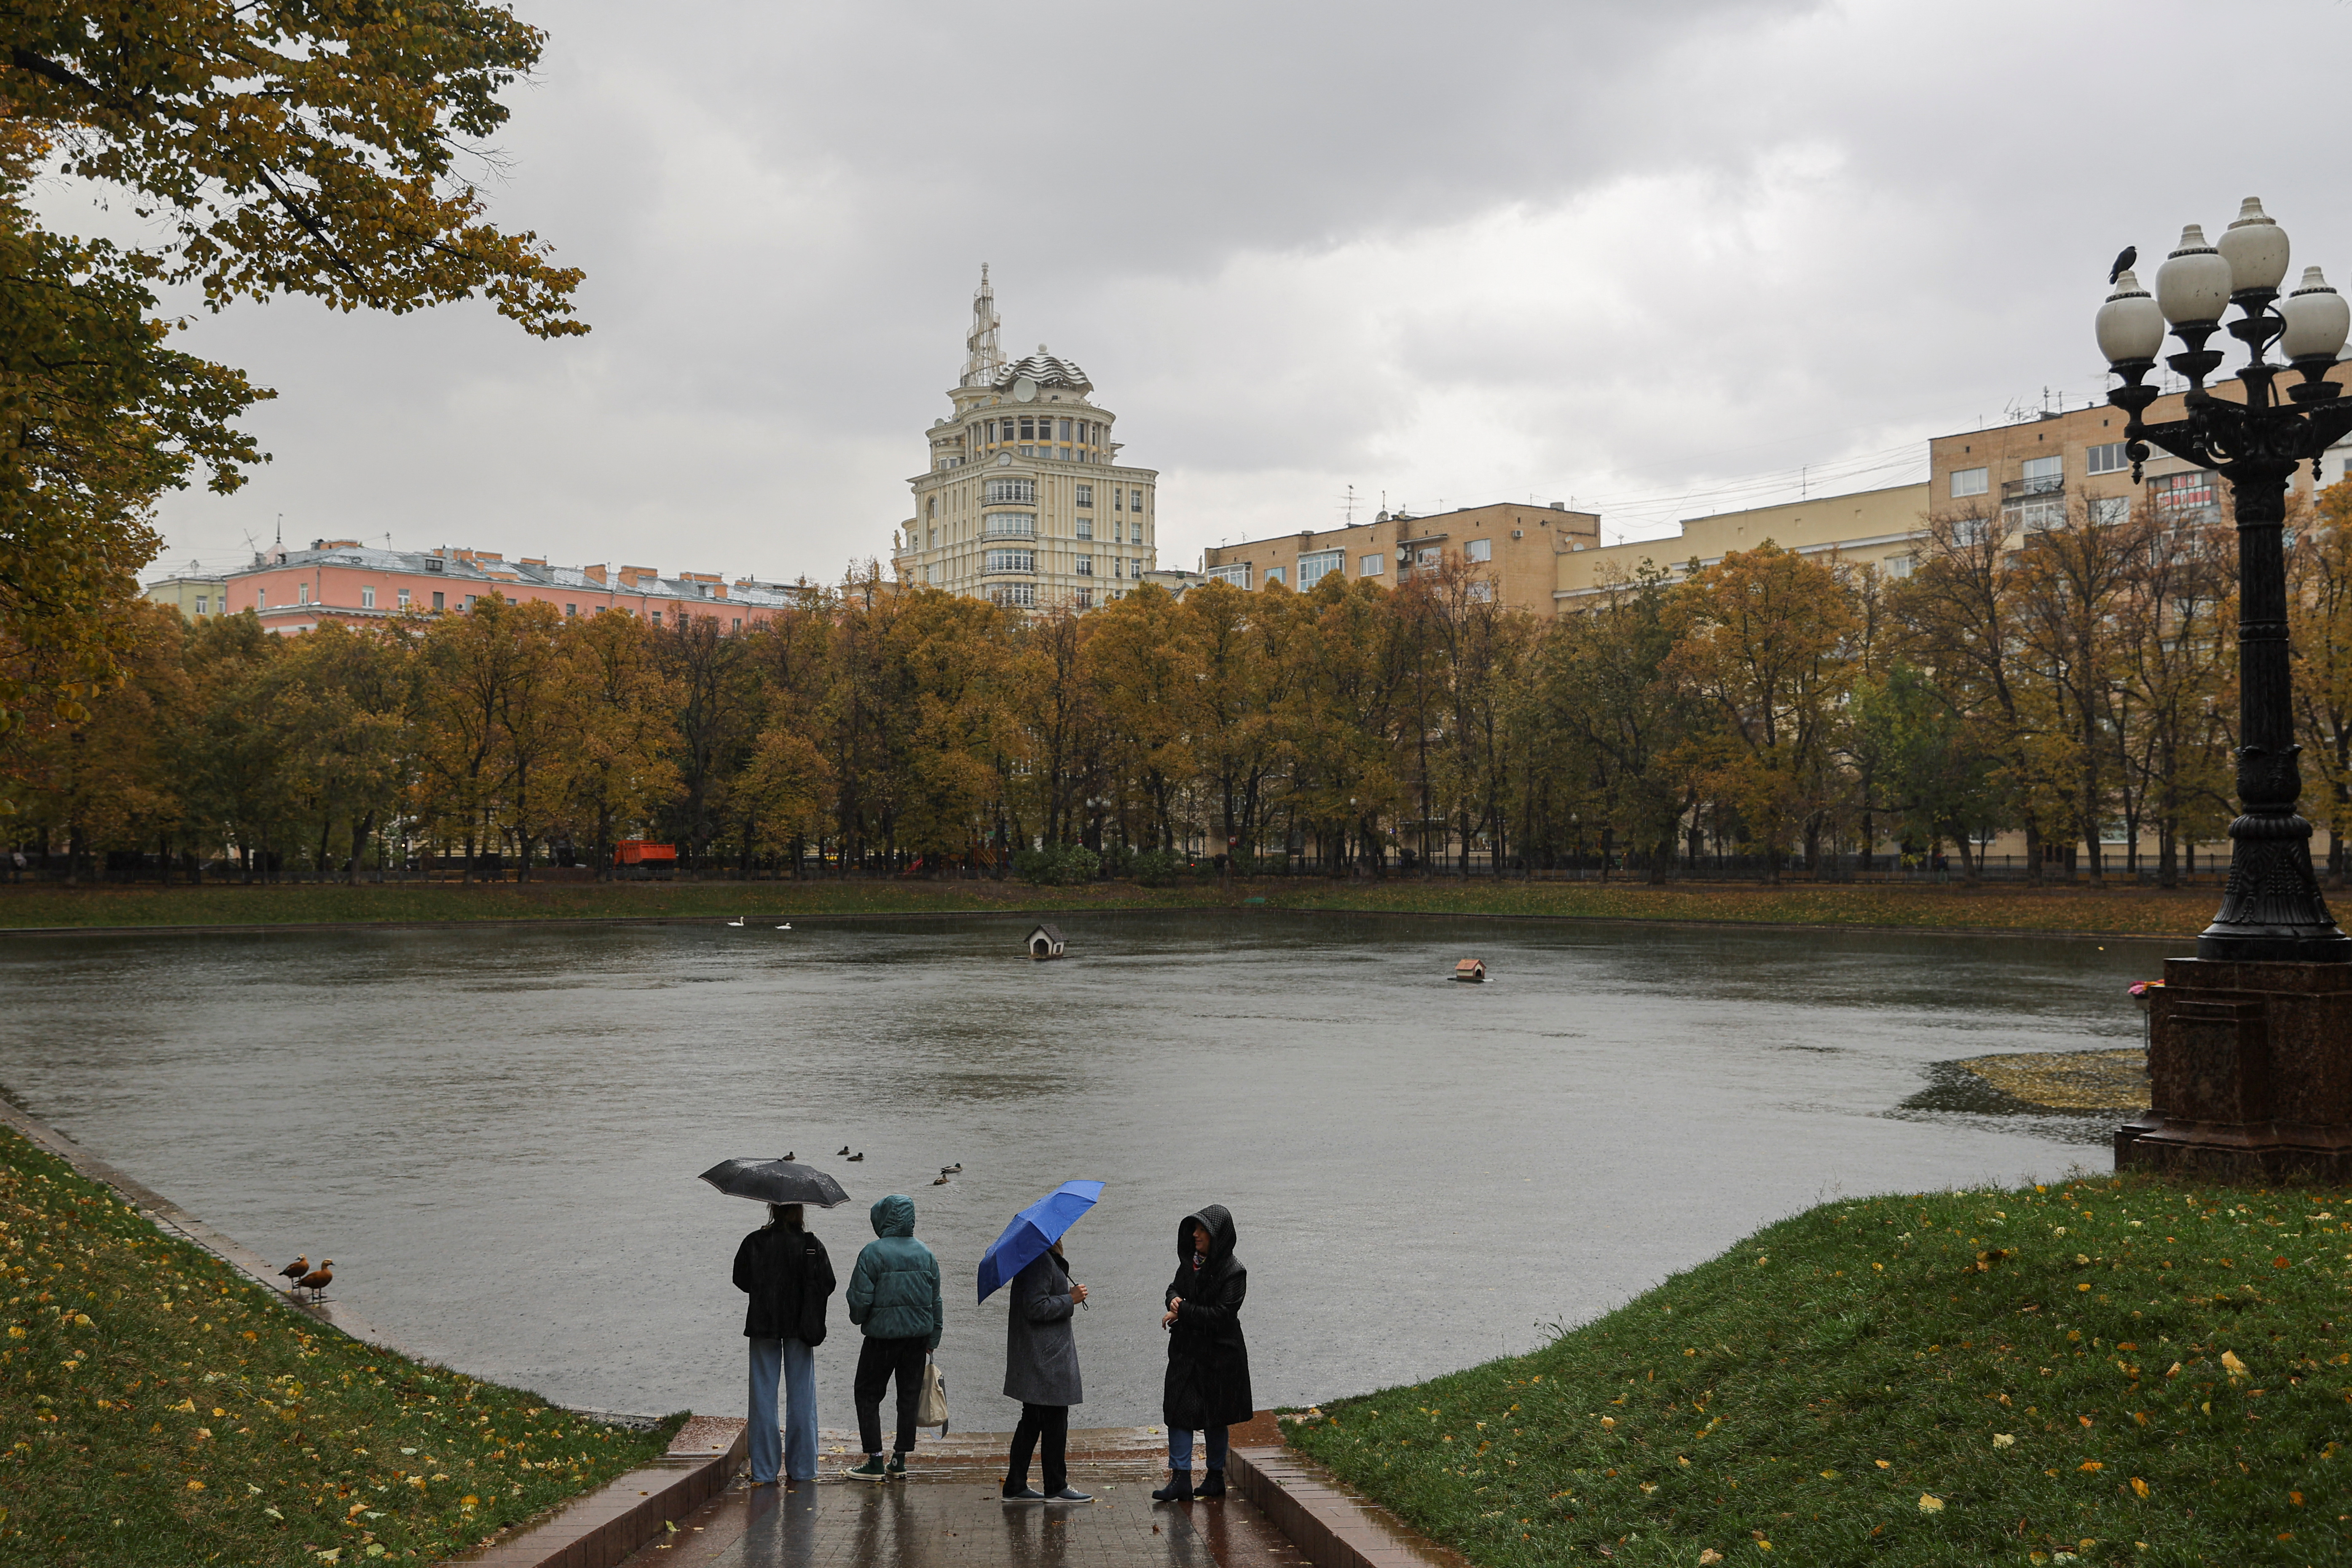 Women next to a pond on a rainy day in Moscow, Russia, October 4, 2022. (REUTERS/Evgenia Novozhenina)